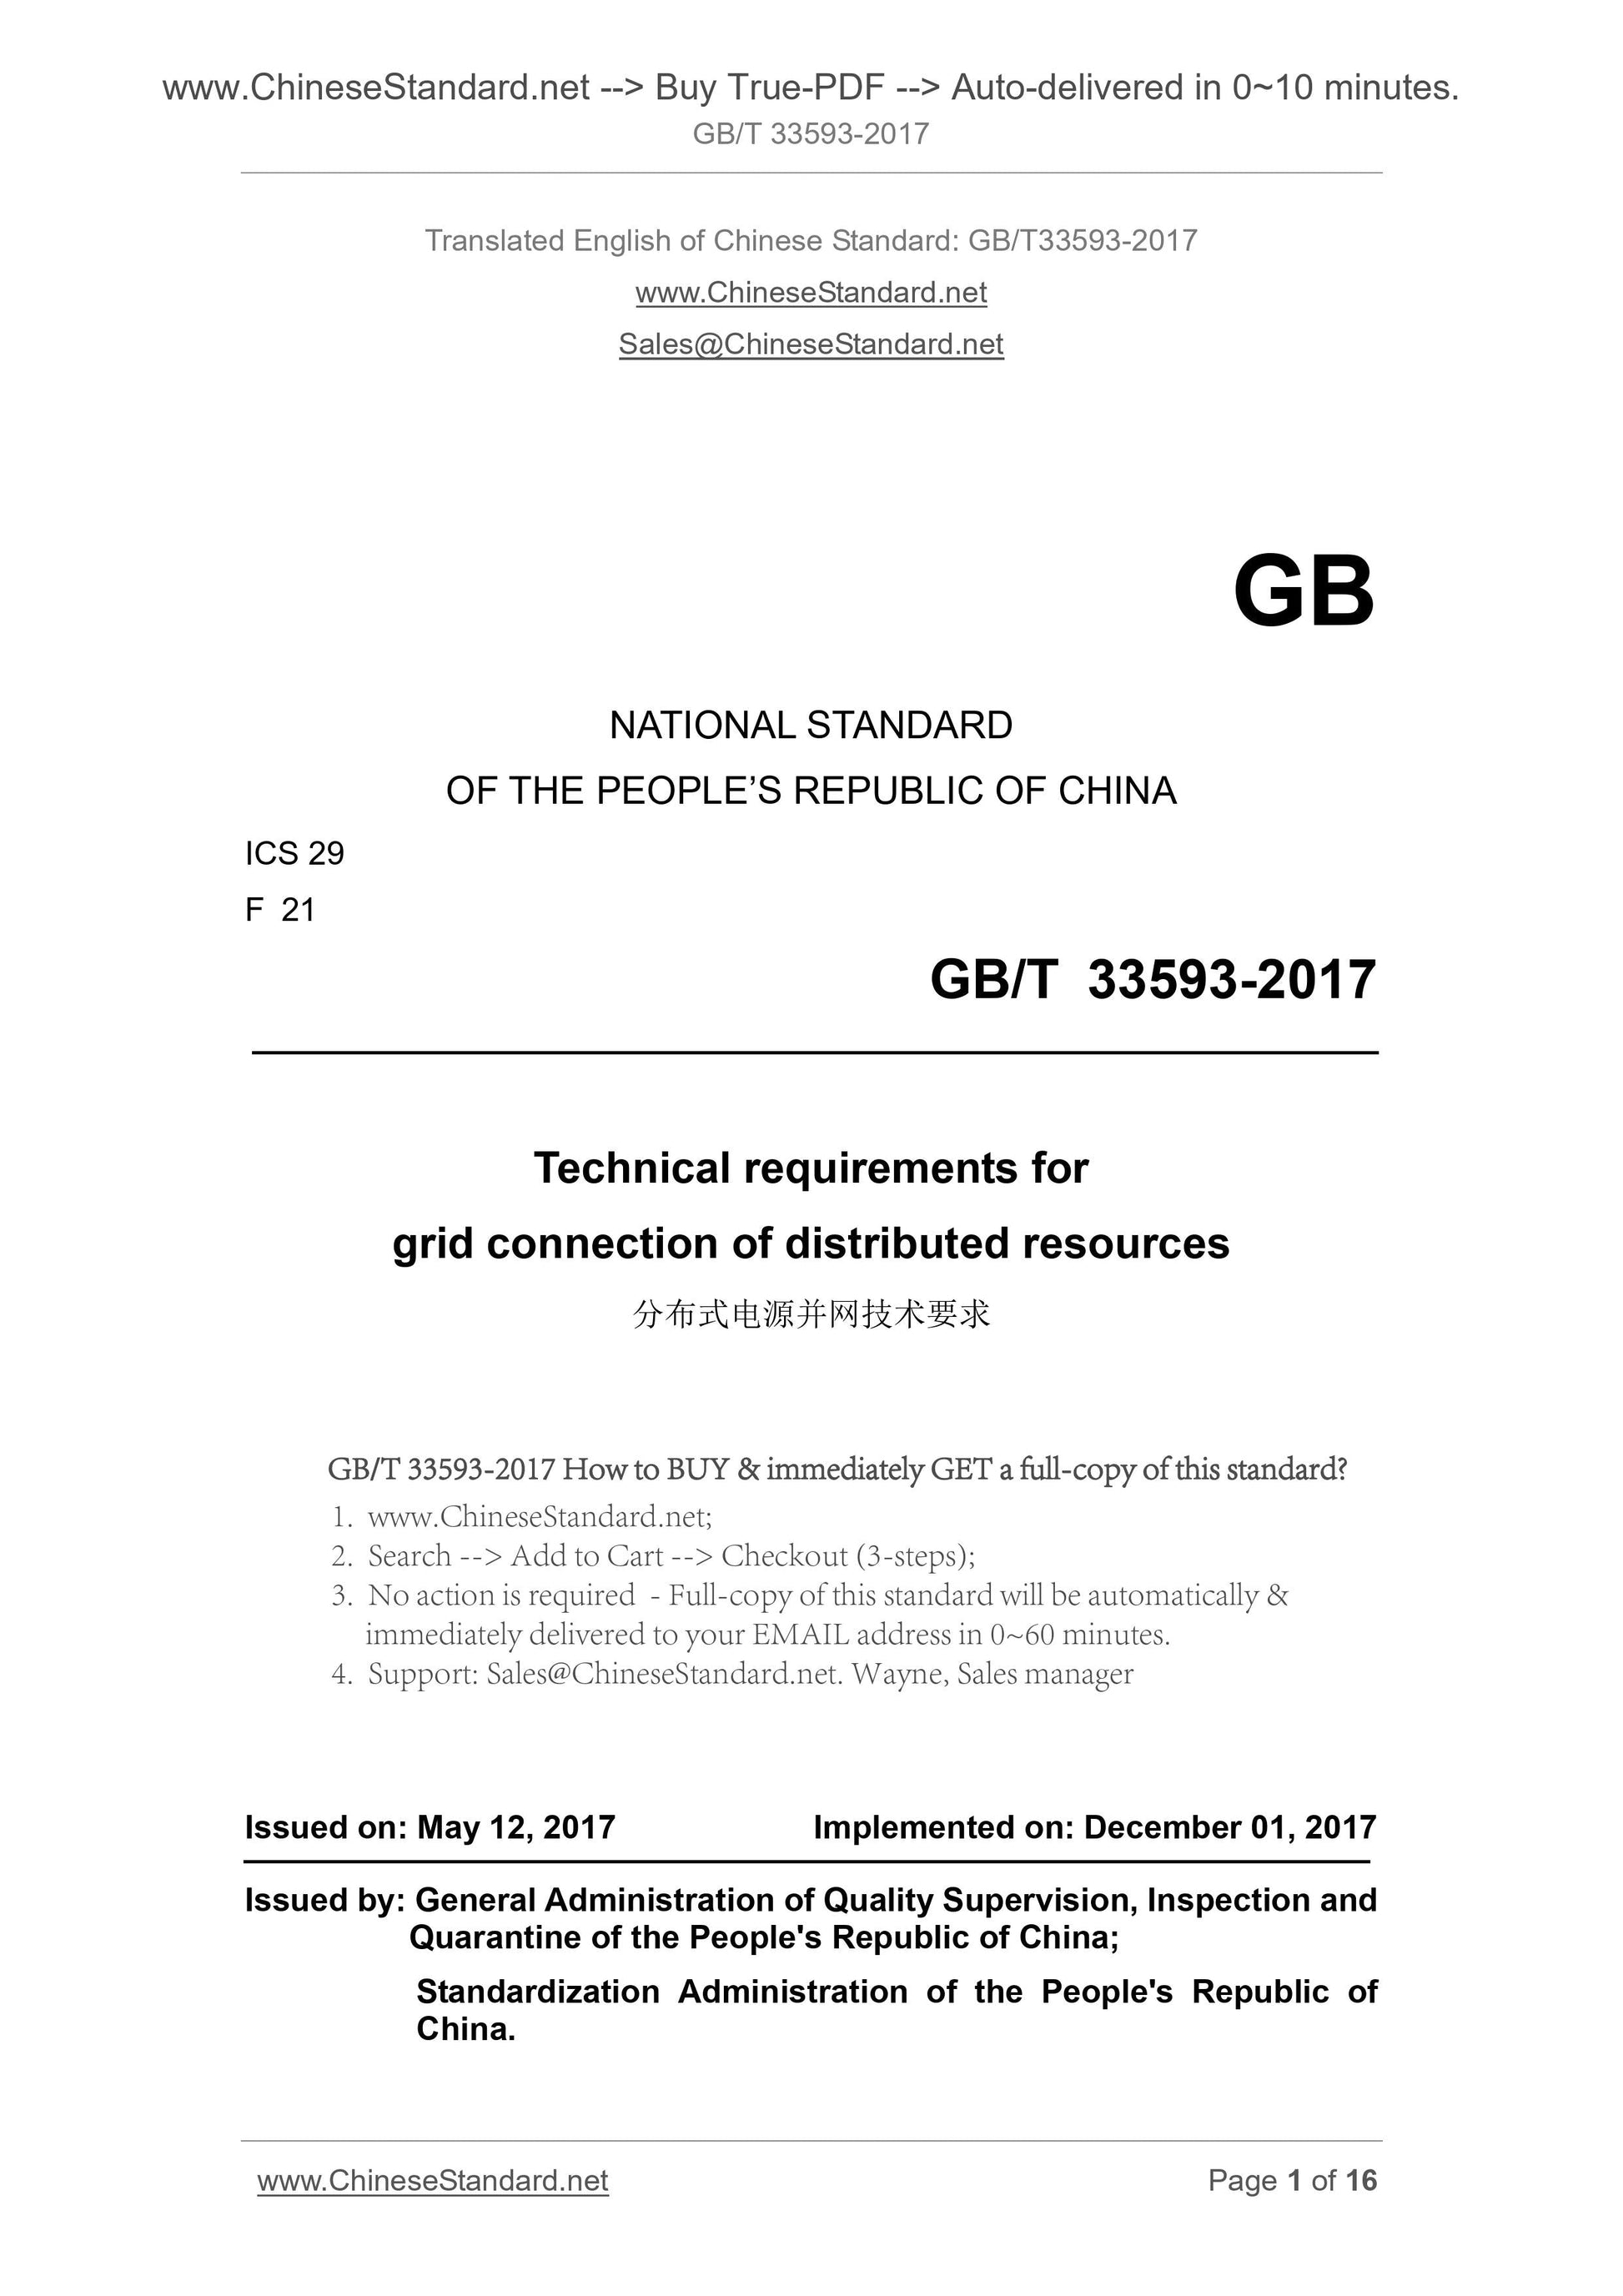 GB/T 33593-2017 Page 1